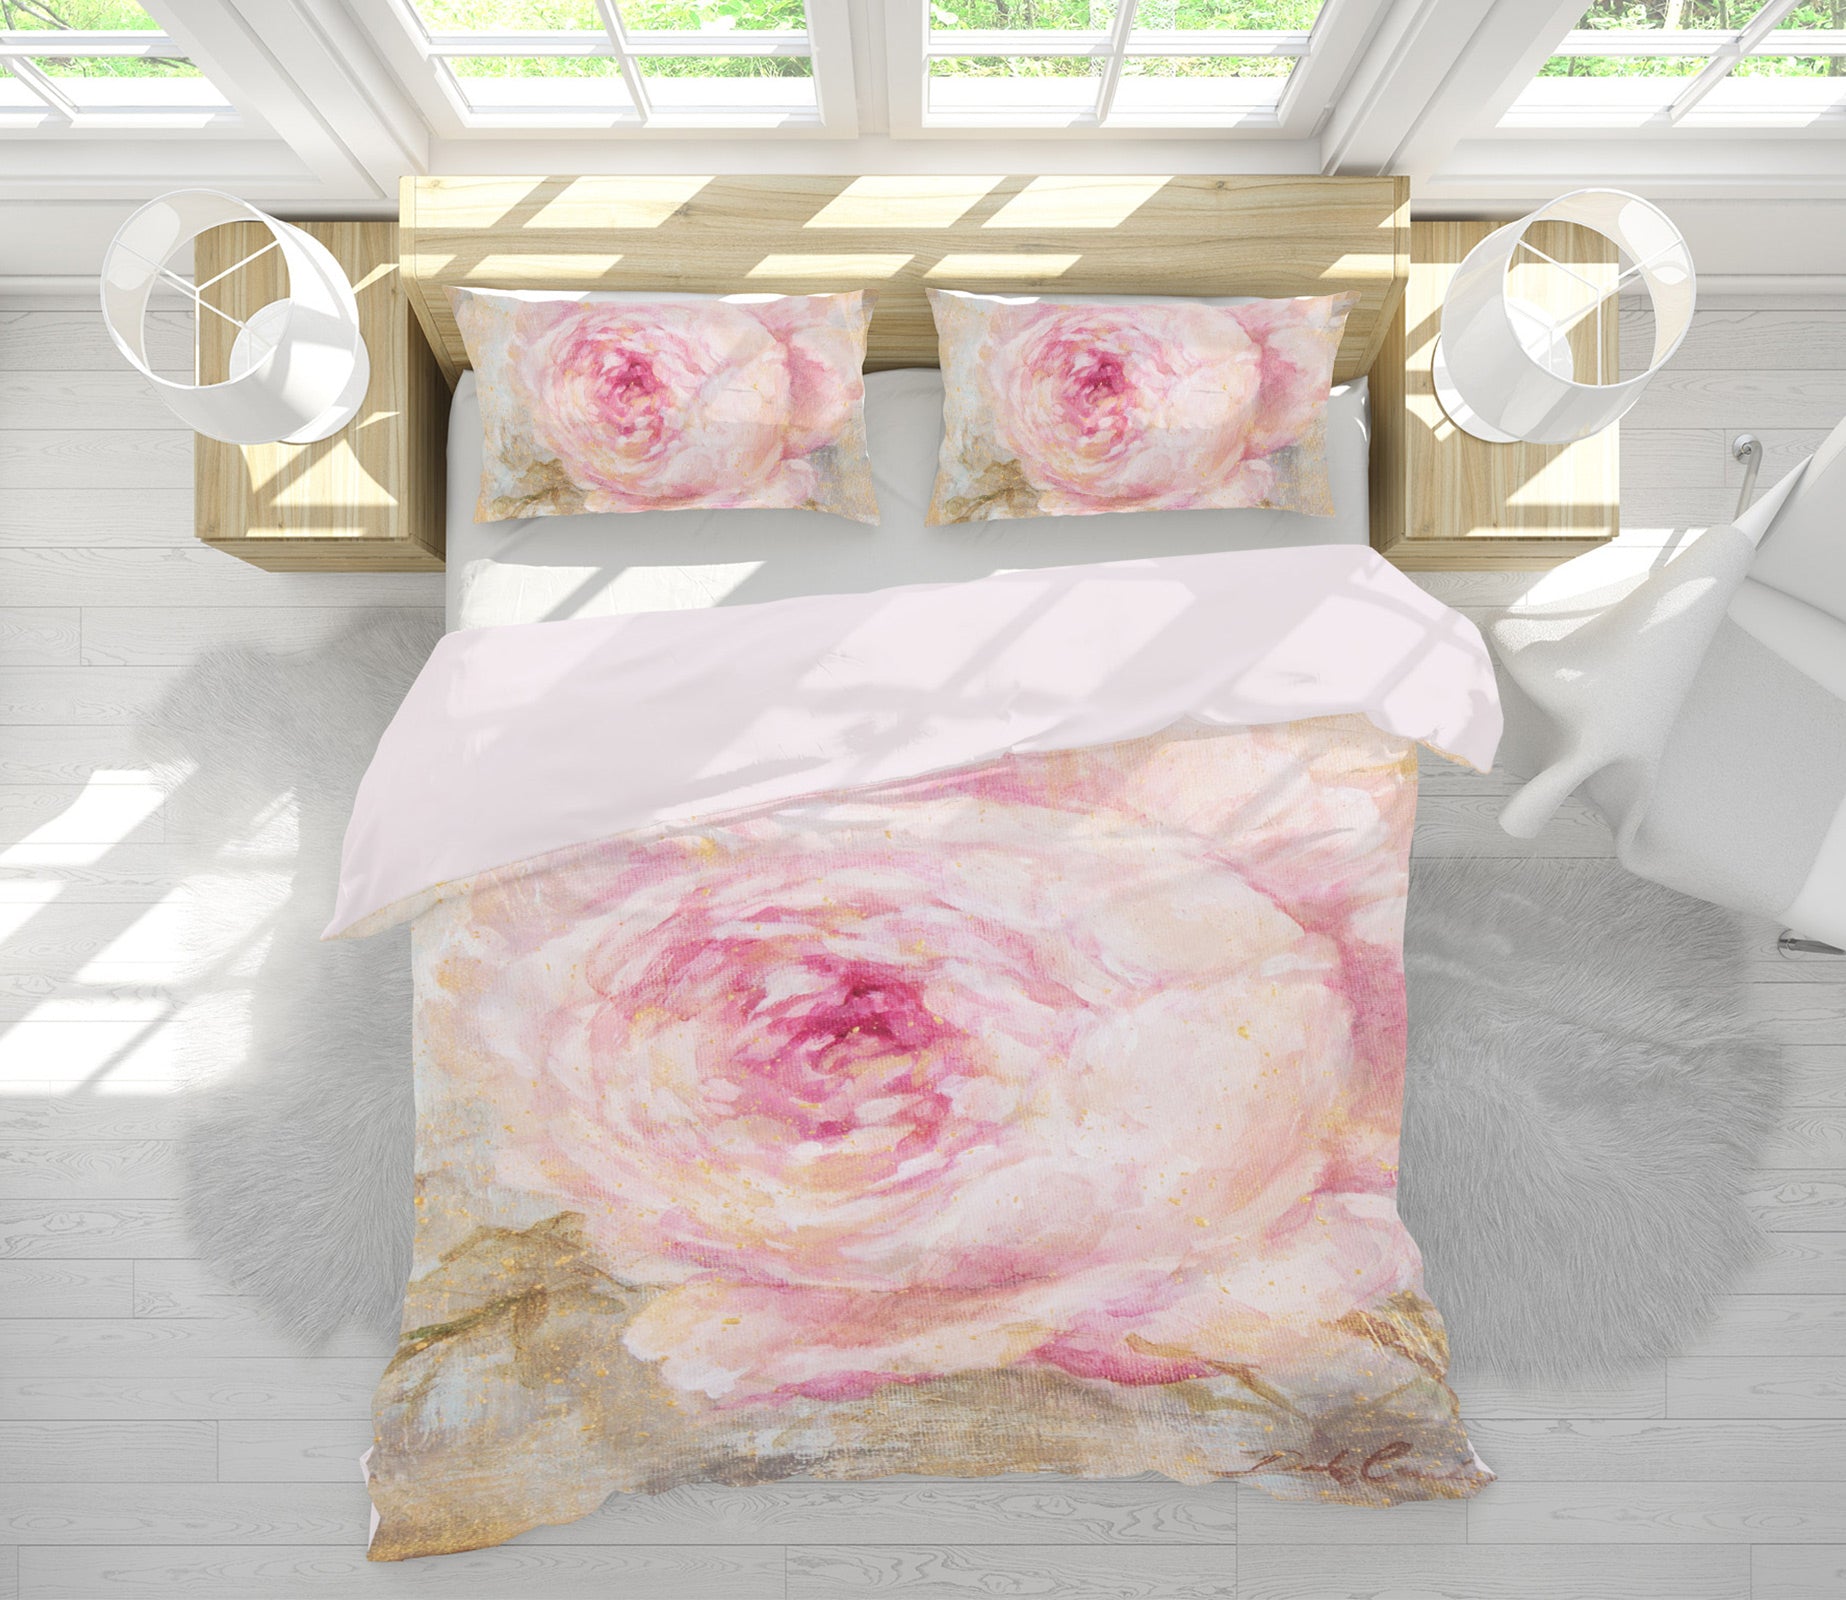 3D Pink Flower 2132 Debi Coules Bedding Bed Pillowcases Quilt